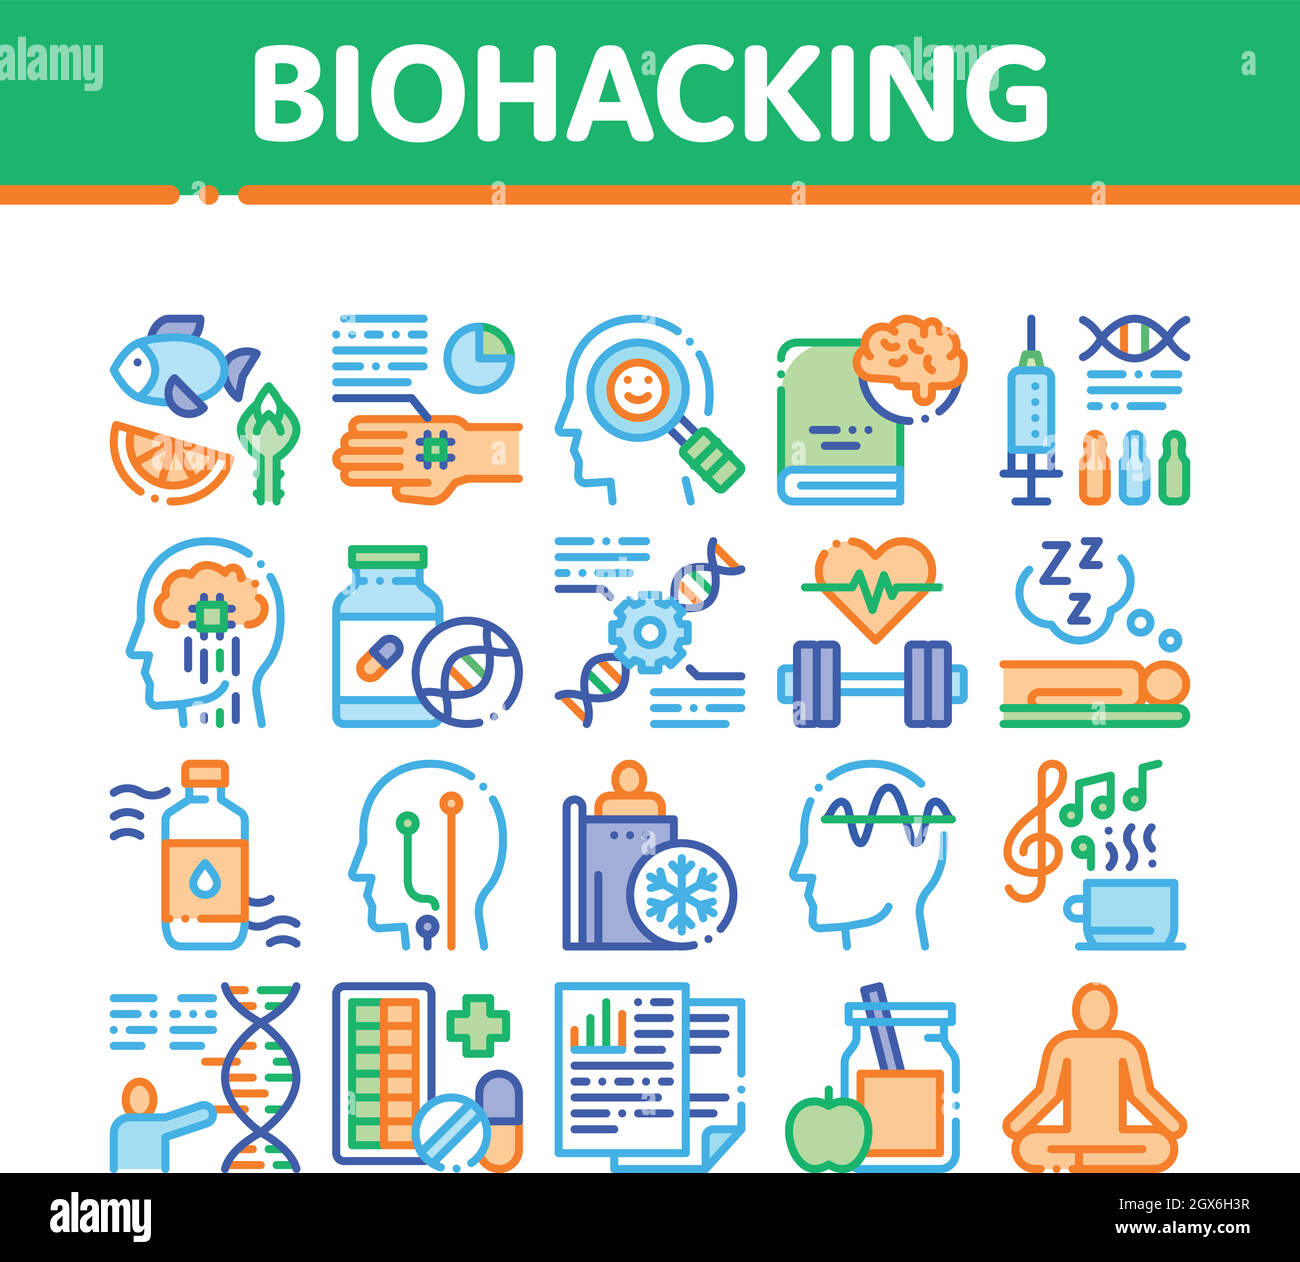 Biohacking Collection Elements Icons Set Vector Stock Vector